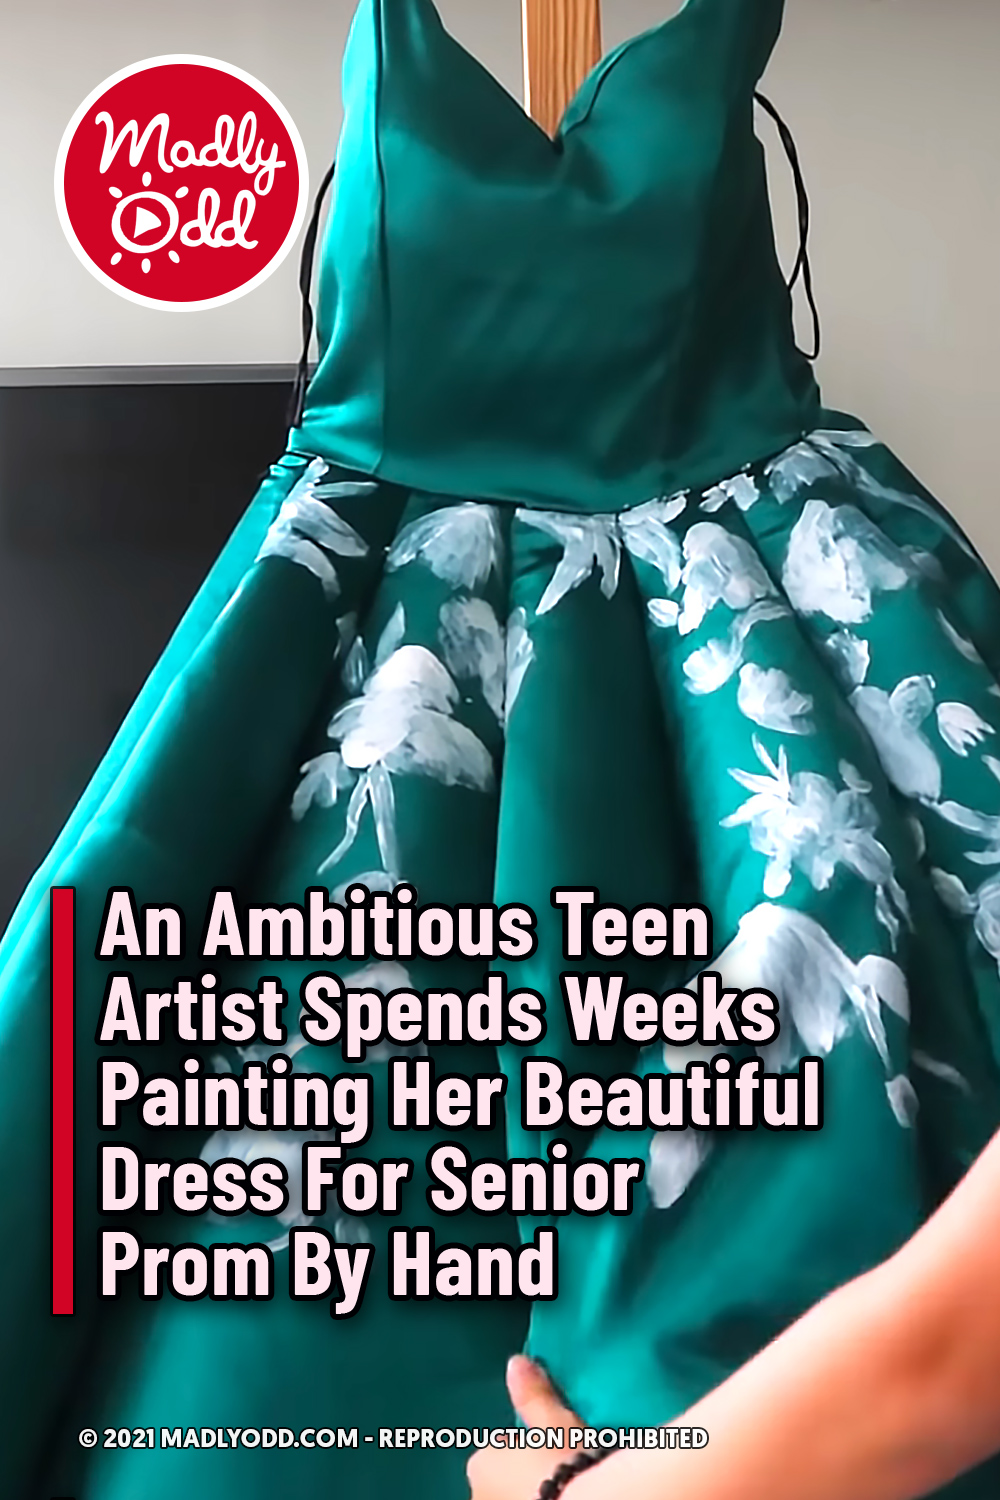 An Ambitious Teen Artist Spends Weeks Painting Her Beautiful Dress For Senior Prom By Hand